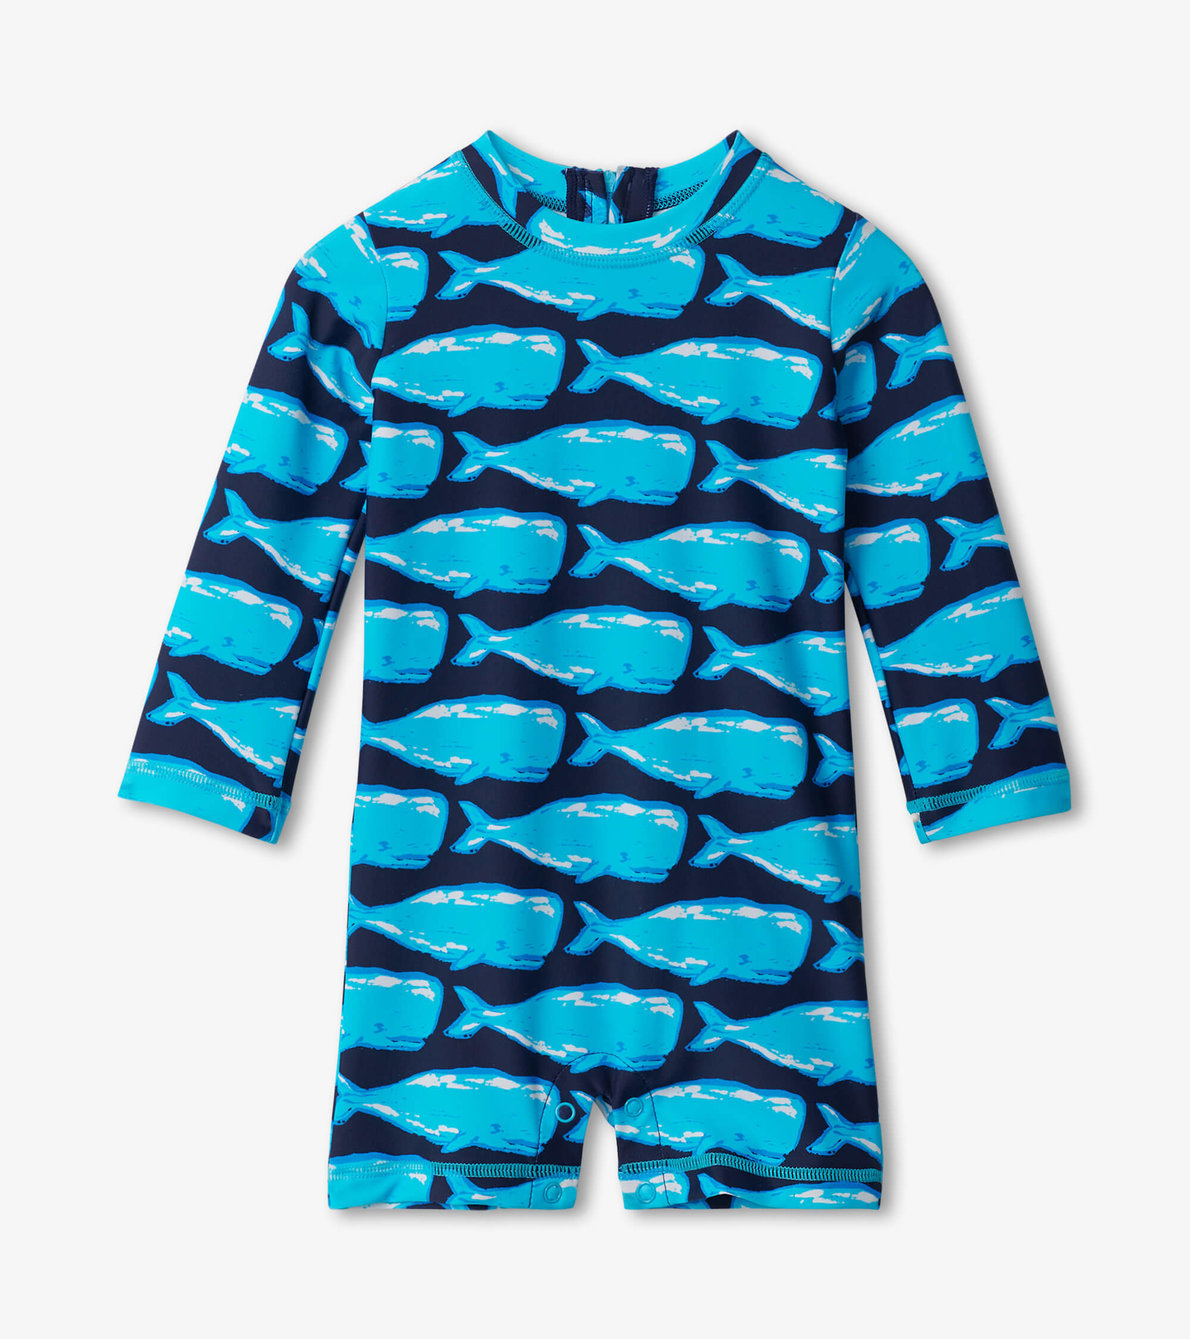 View larger image of Whale Pod Baby One-Piece Rashguard